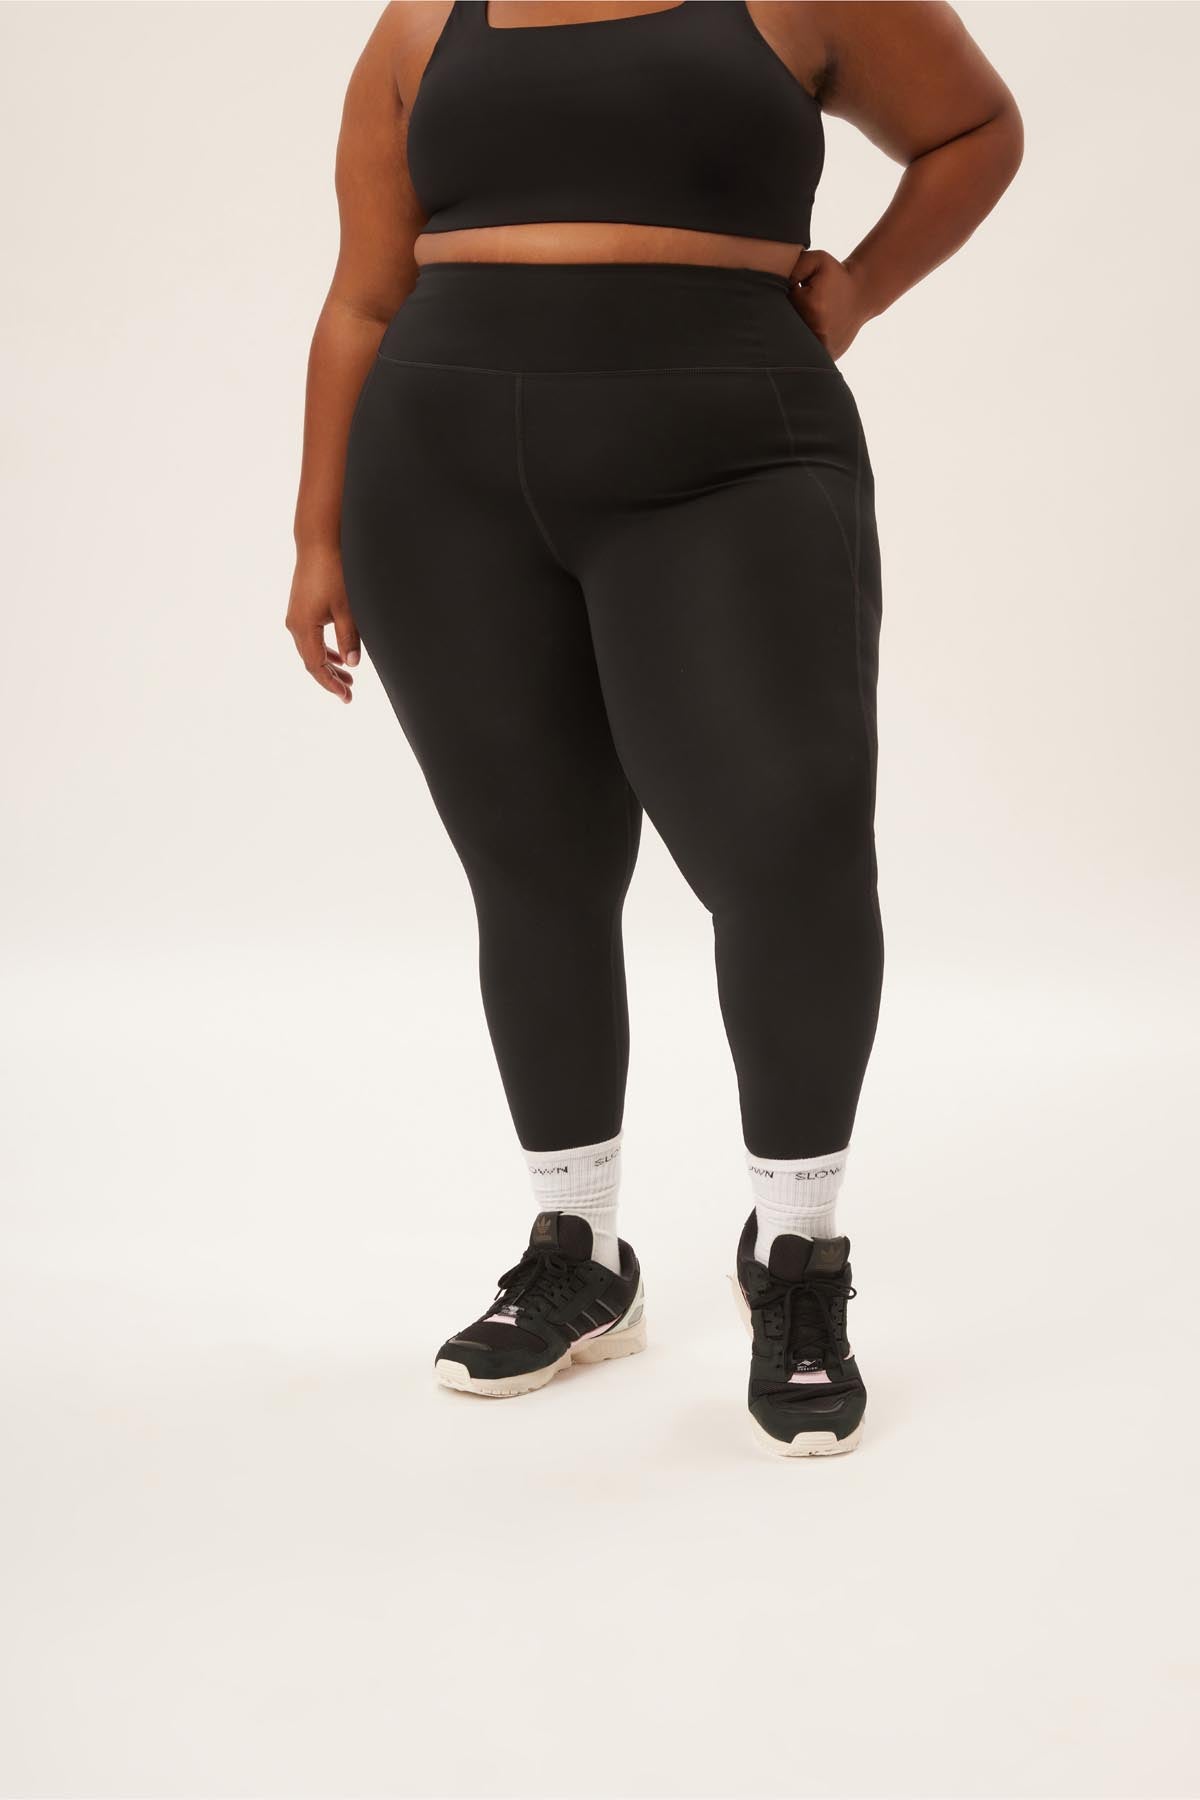 These Plus-Size Leggings Have the Best Reviews | Who What Wear